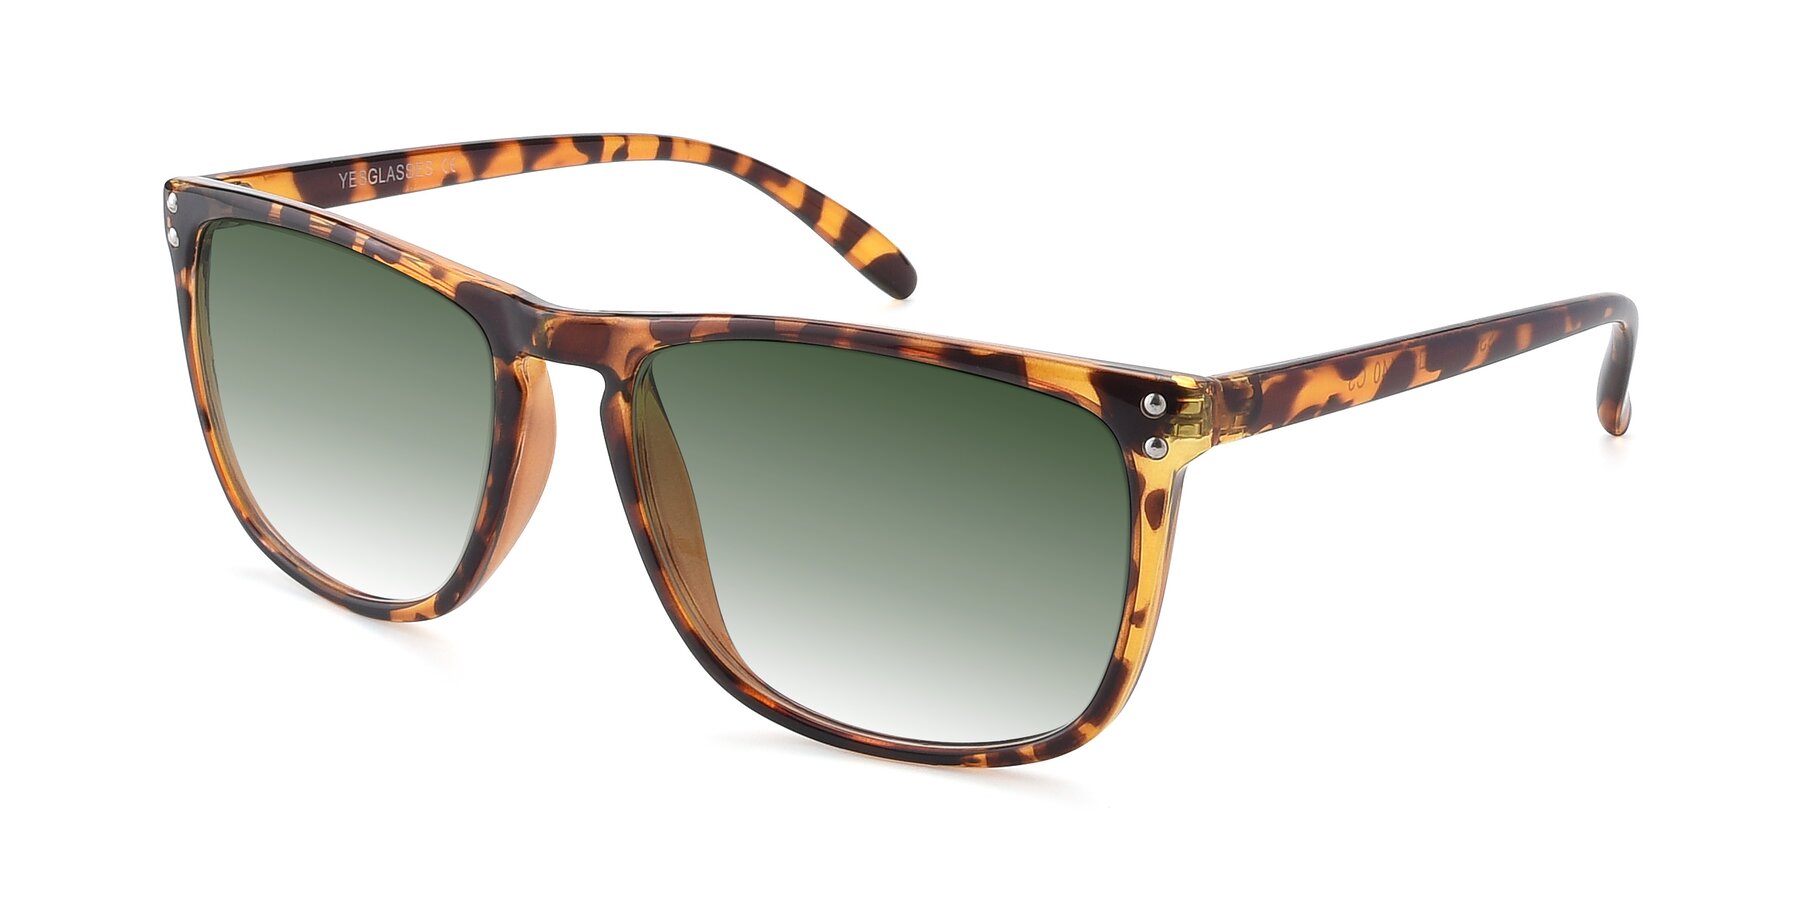 Angle of SSR411 in Translucent Orange Tortoise with Green Gradient Lenses